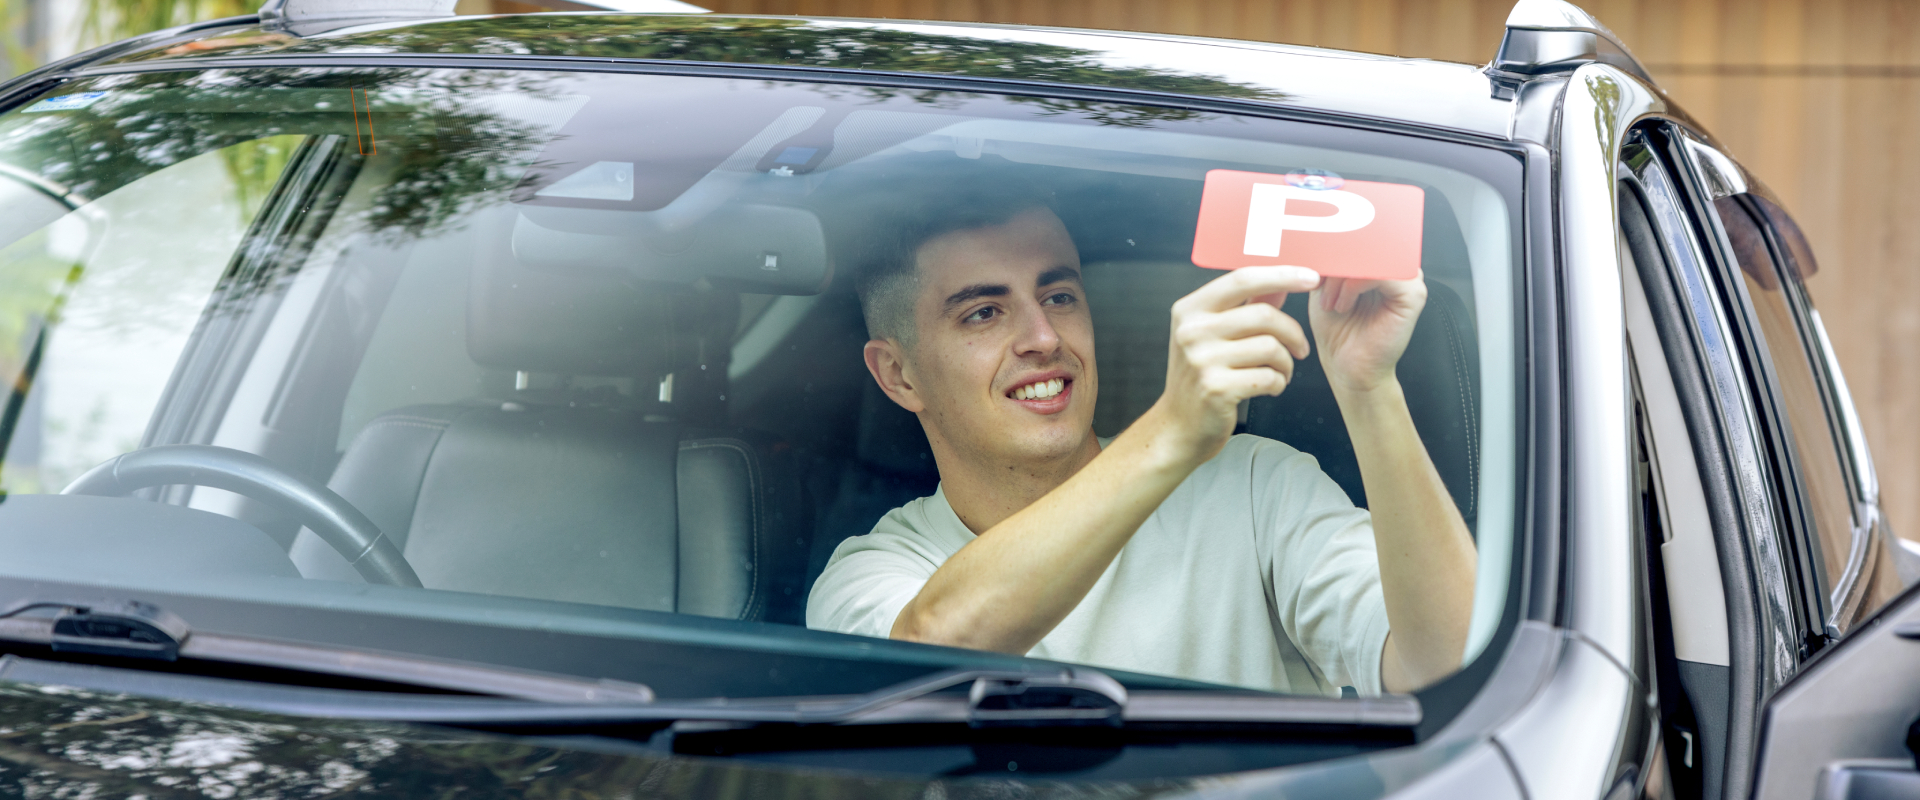 Young male putting red P Plate on front window of car